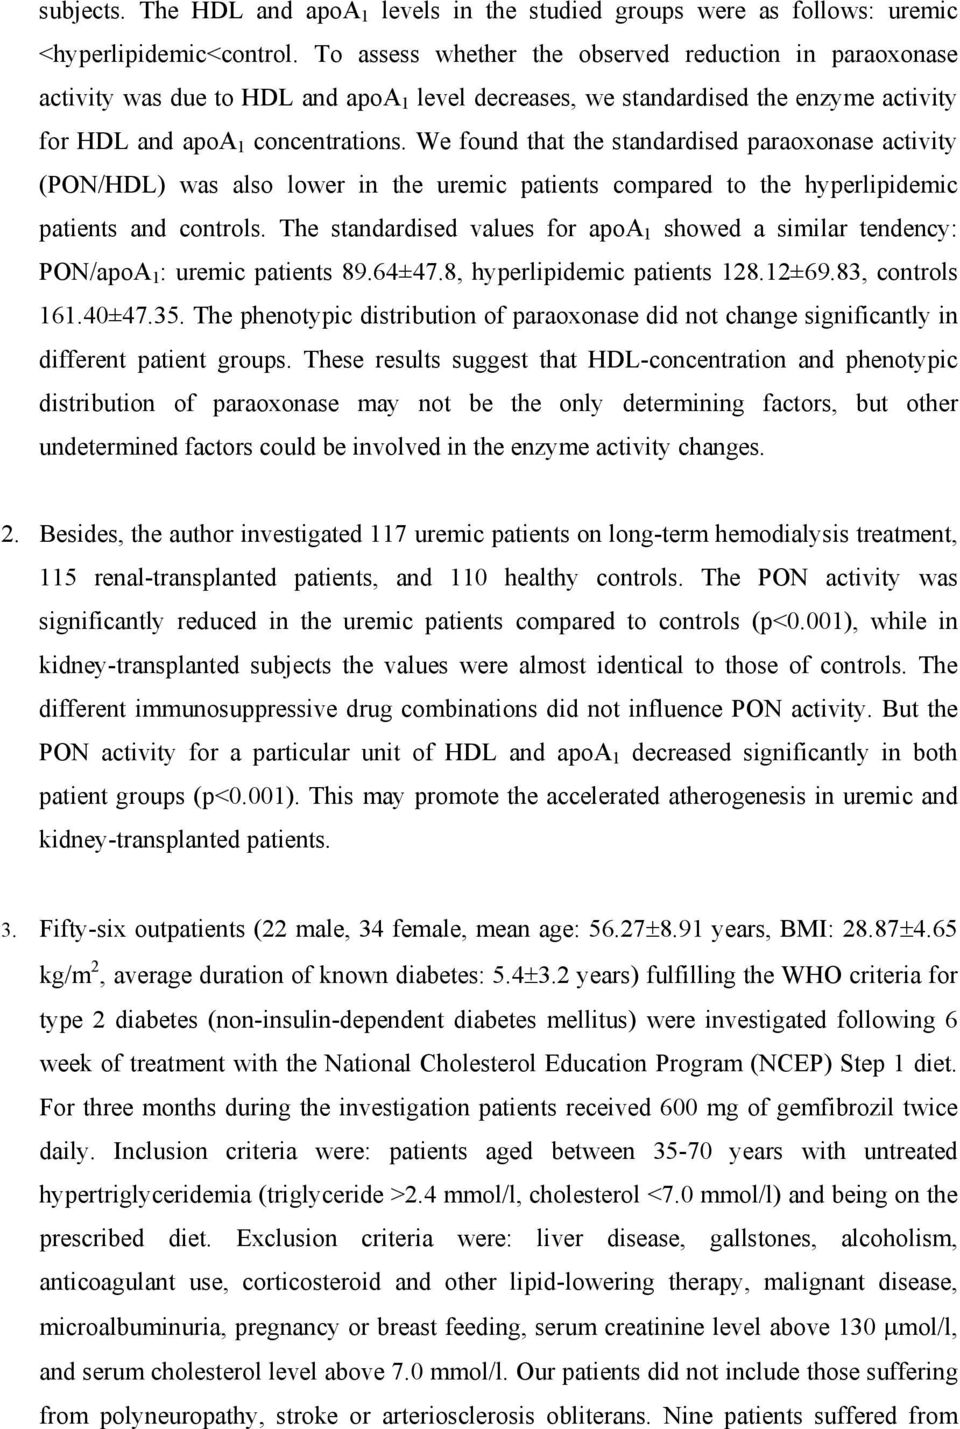 We found that the standardised paraoxonase activity (PON/HDL) was also lower in the uremic patients compared to the hyperlipidemic patients and controls.